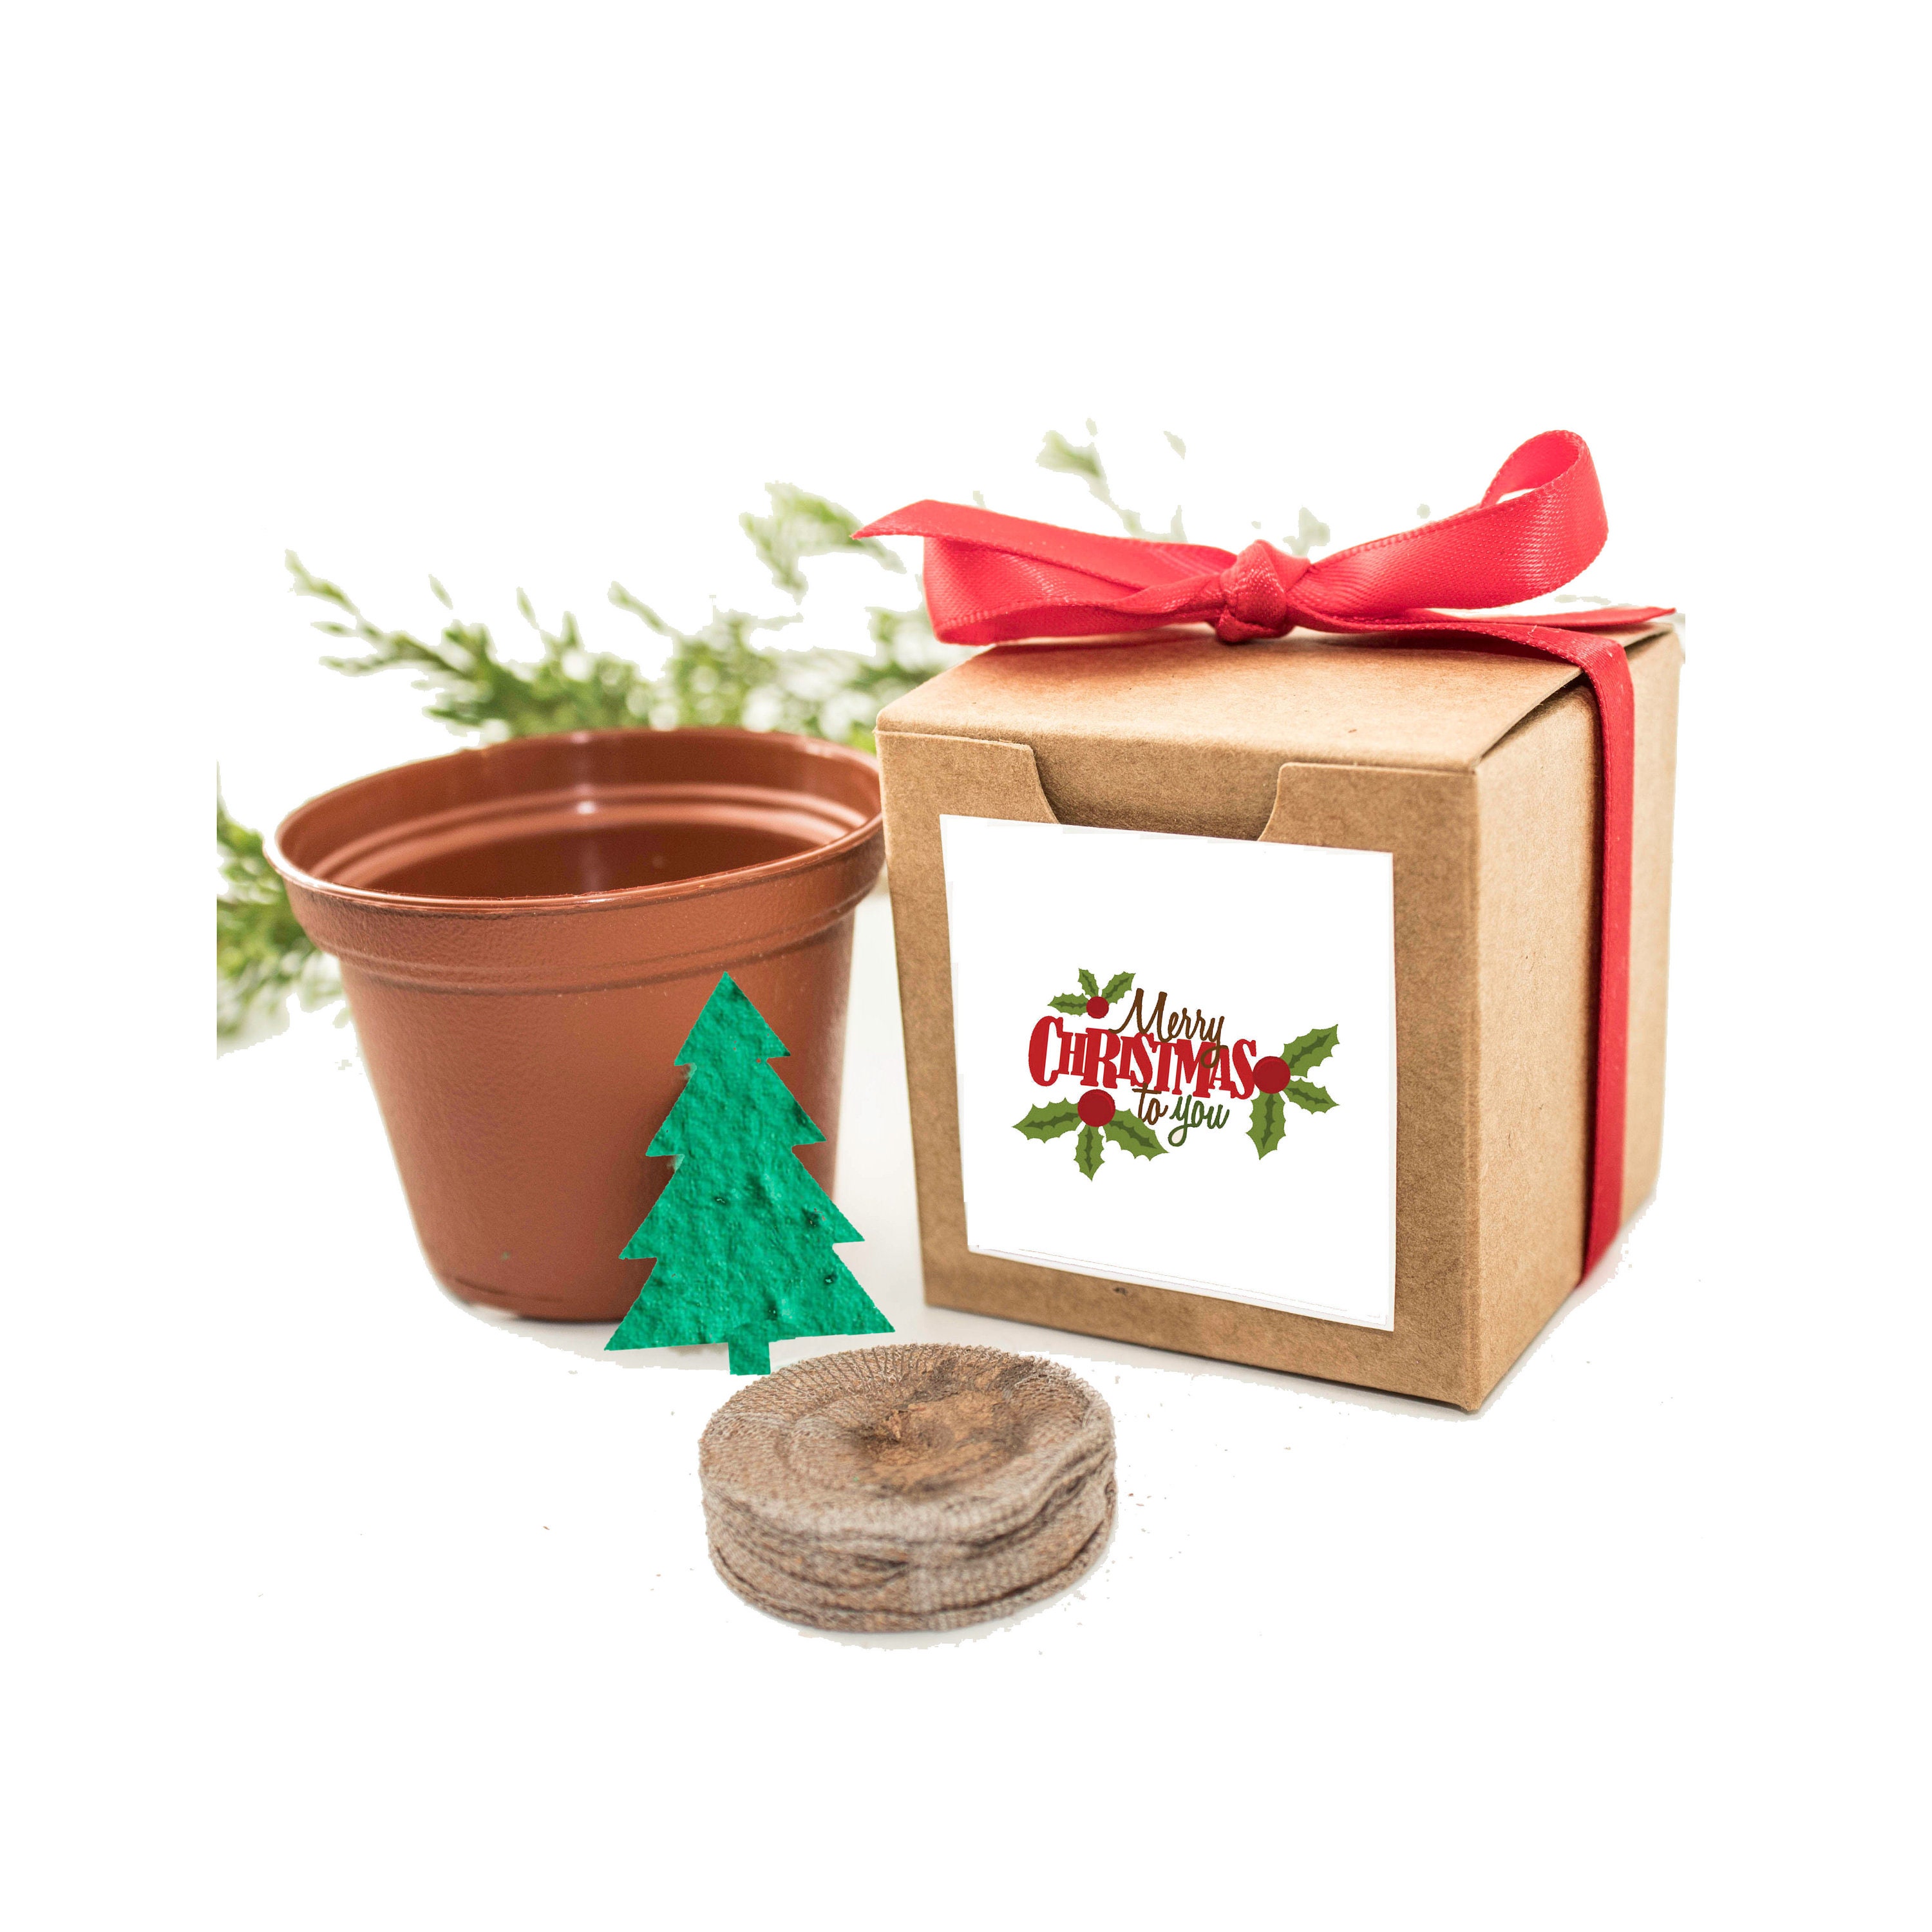 Family Christmas Gift Ideas, Christmas gifts for home, in law Christma –  Plant Box Co